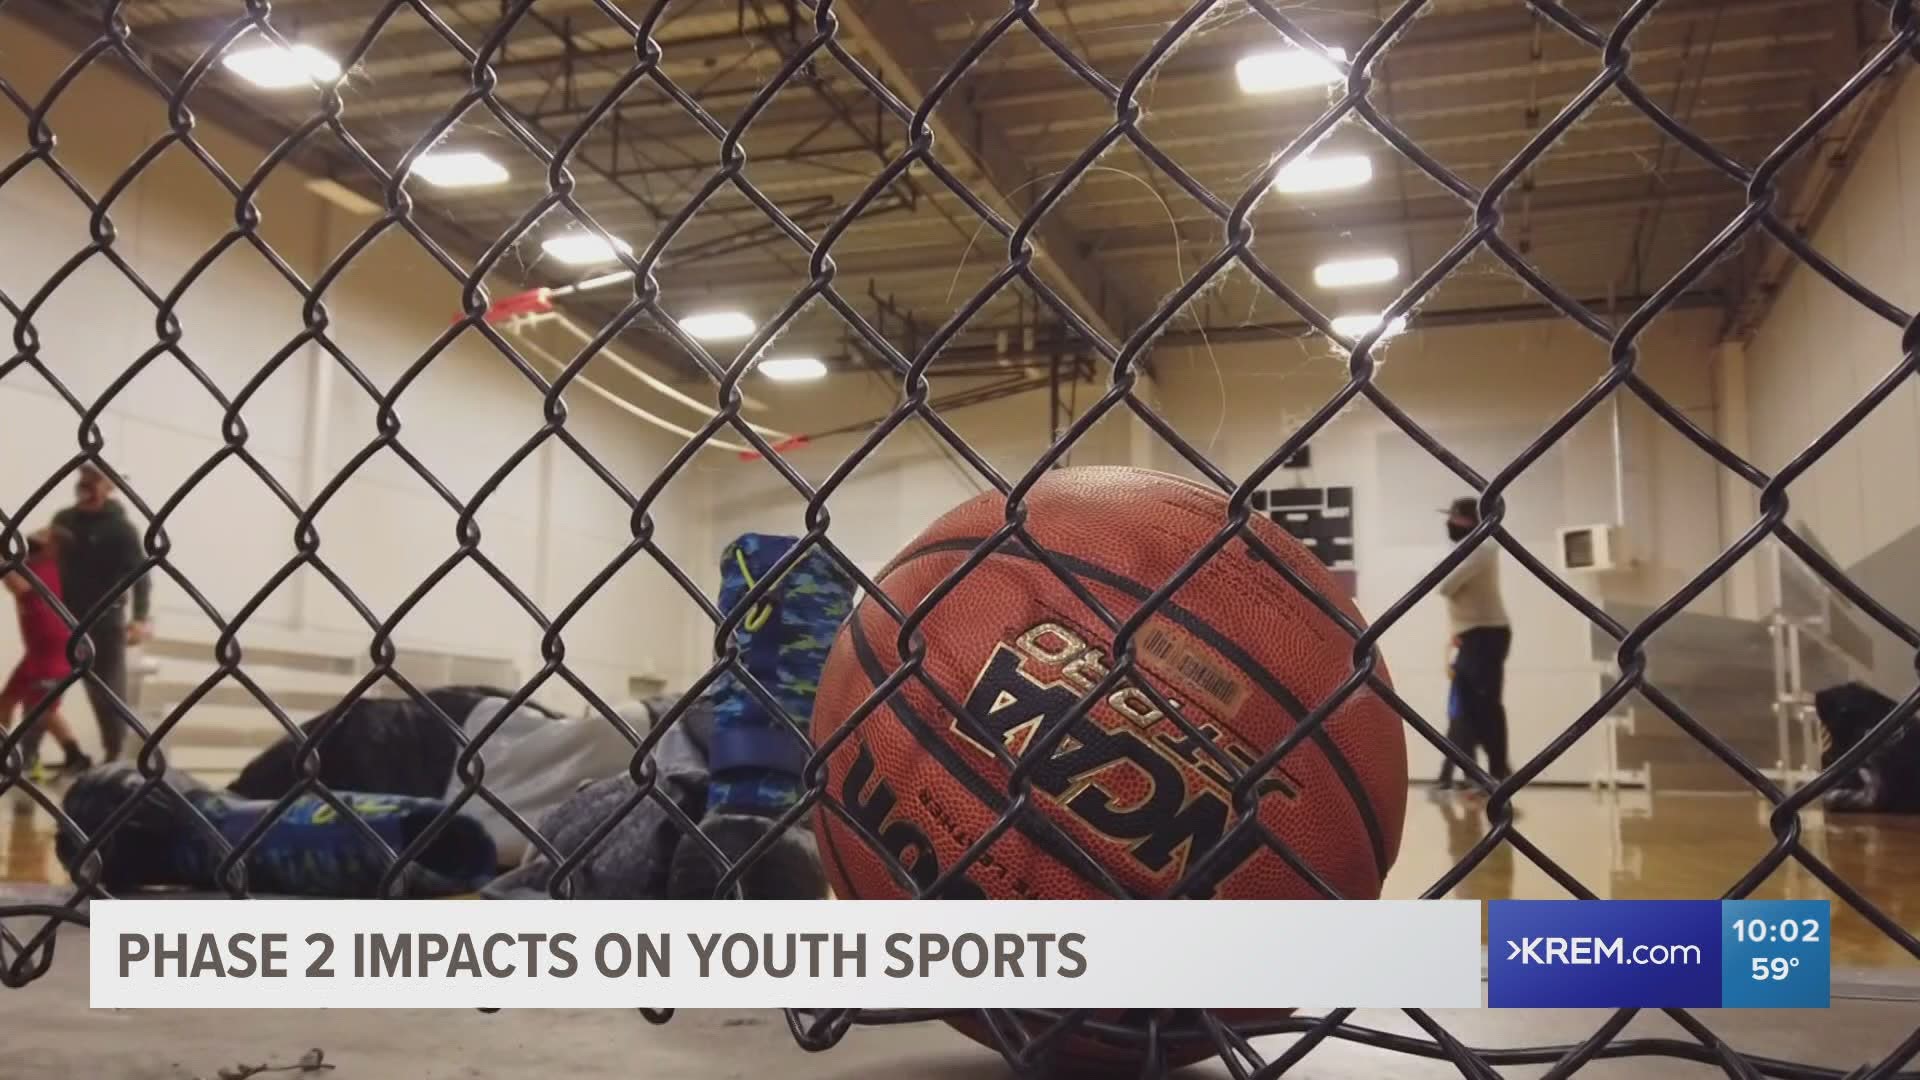 Local youth sport leaders voice their frustrations about the possibility of more games and events being cancelled, and the impact it could have on kids.